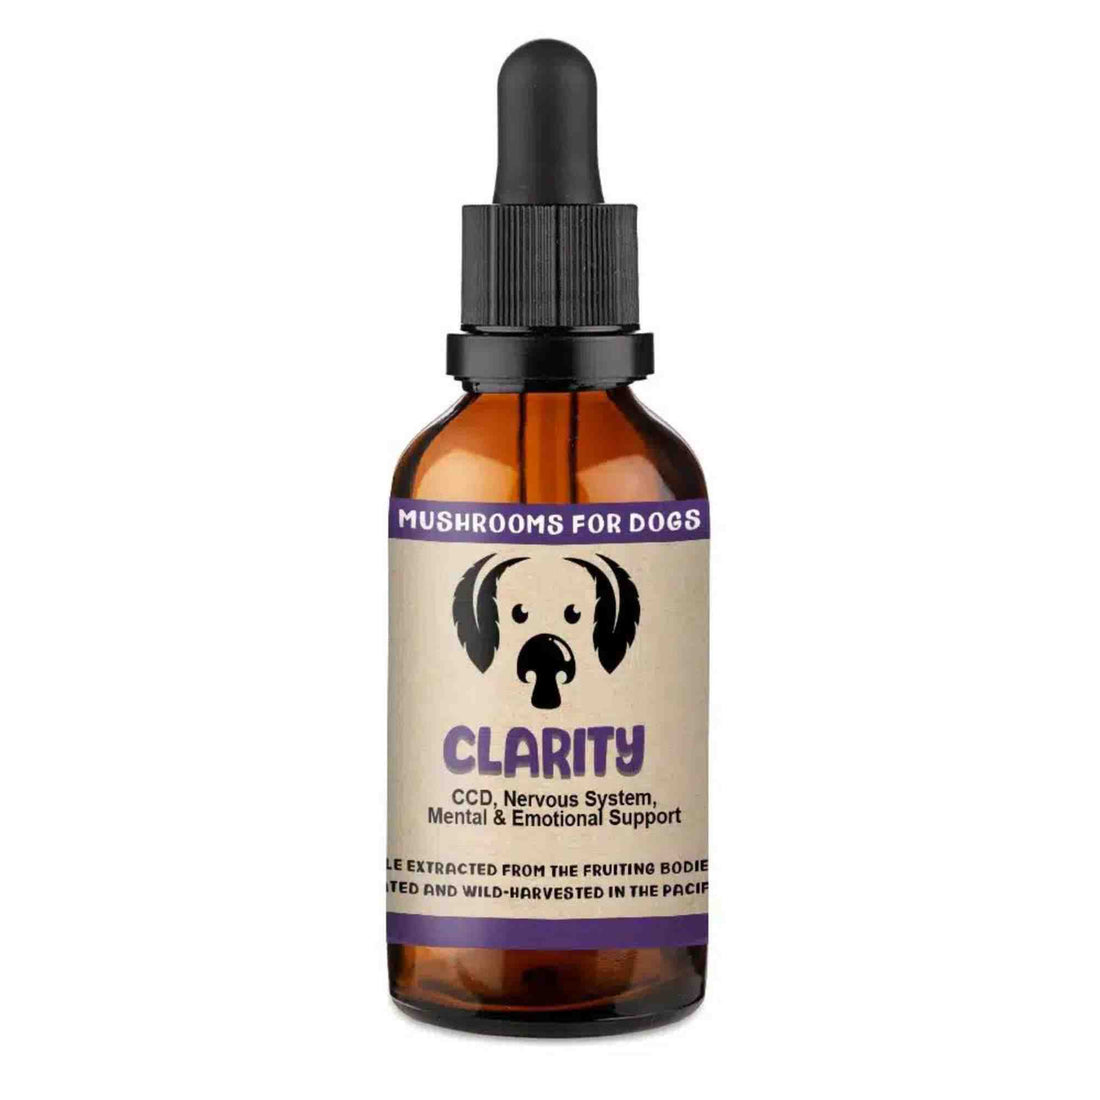 Clarity Mushrooms by Mycodog - front of bottle - displaying that it is for CCD, Nervous system, mental and emotional support